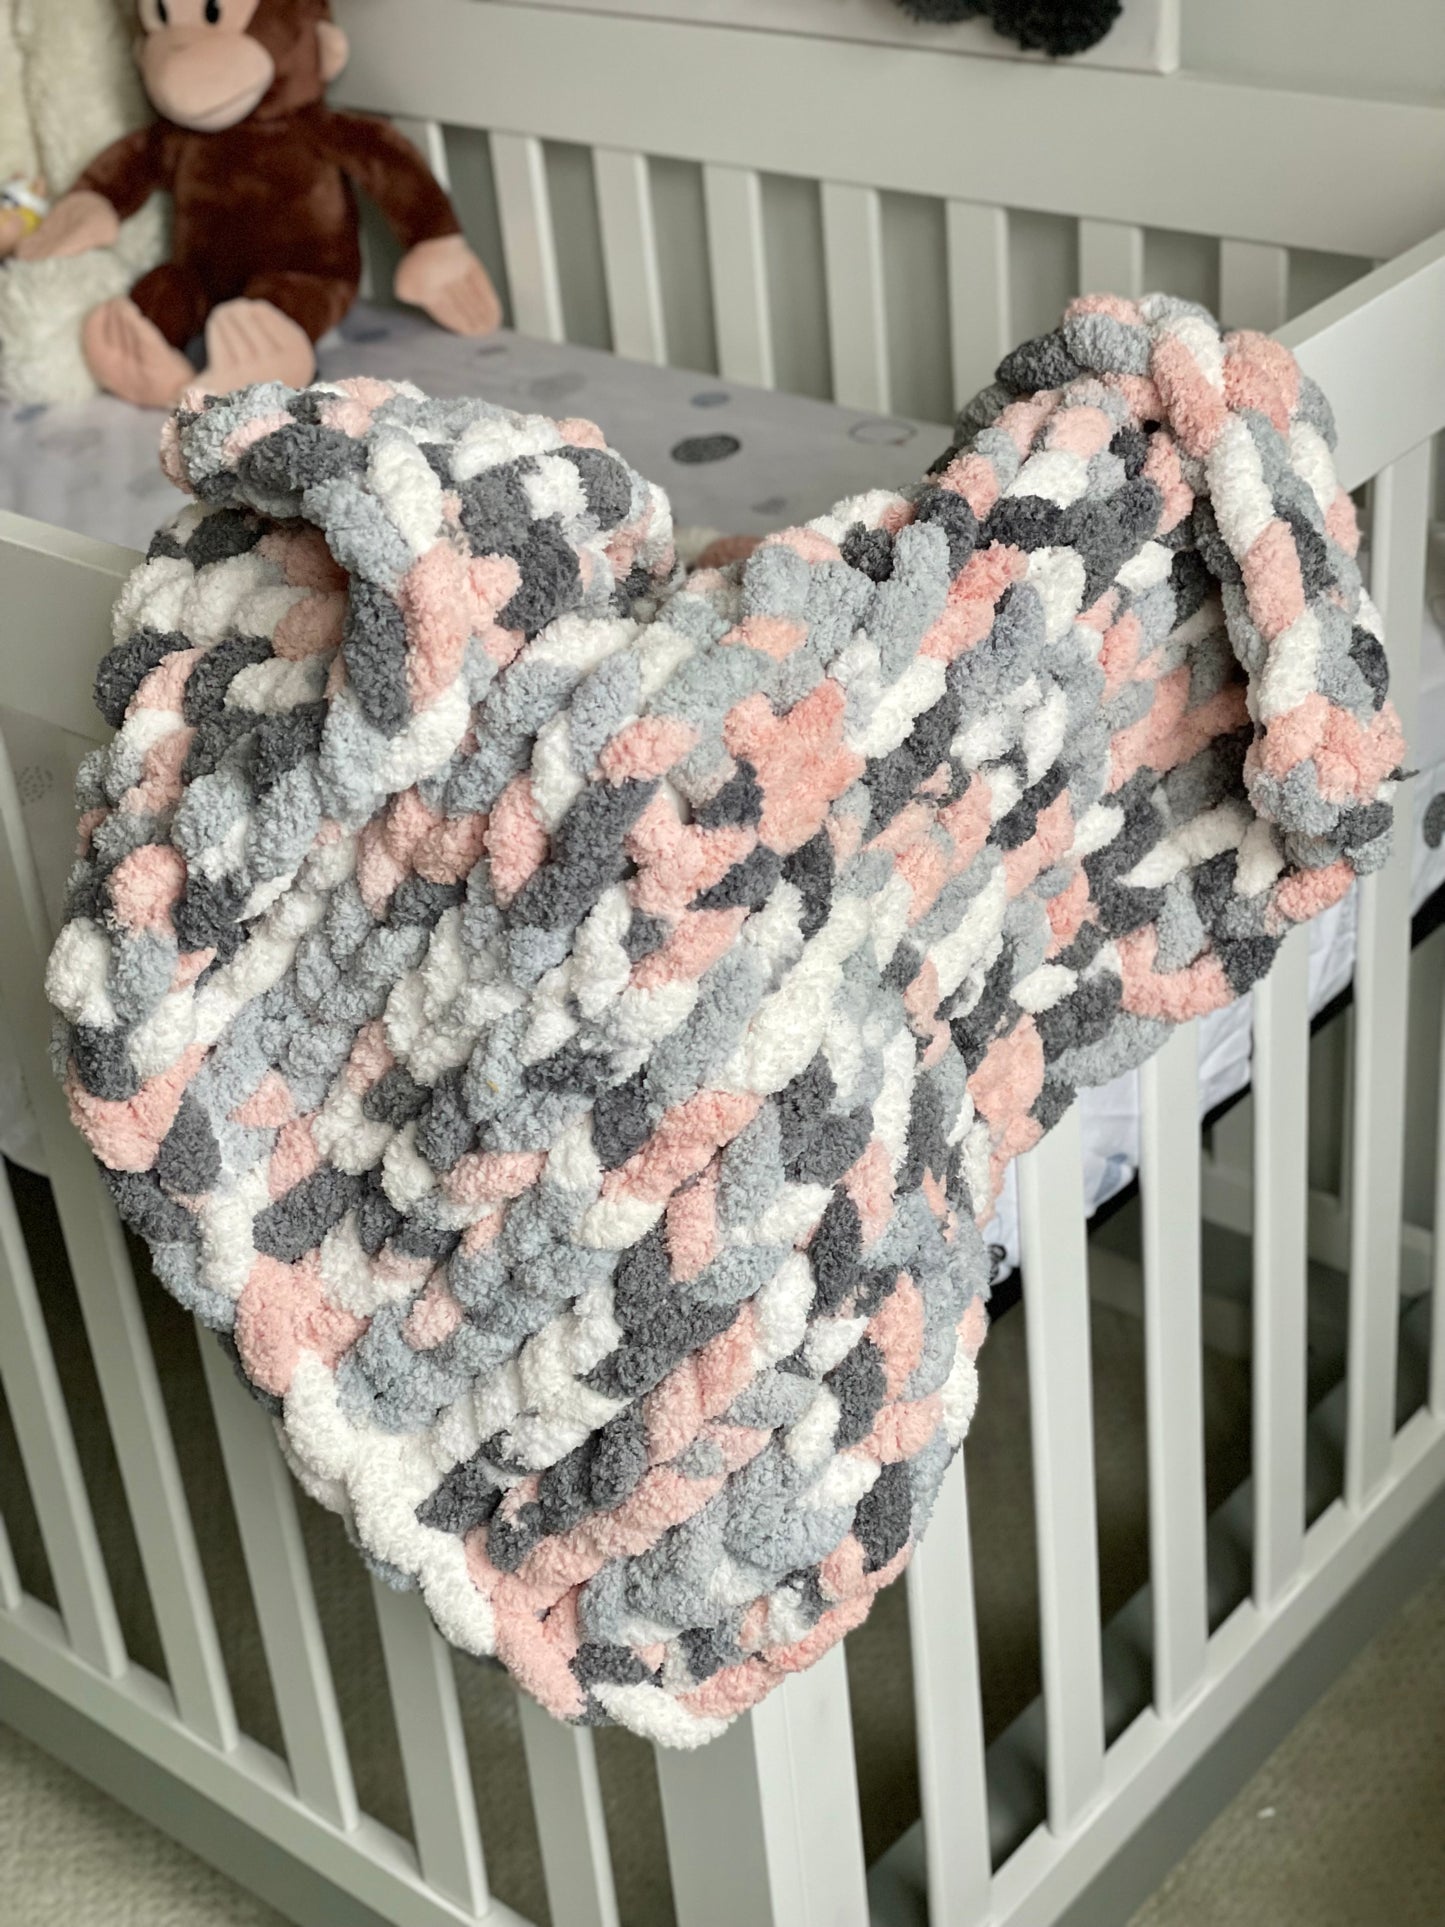 Healing Hand, Chunky Knit Baby Blankets - Pink marble mix